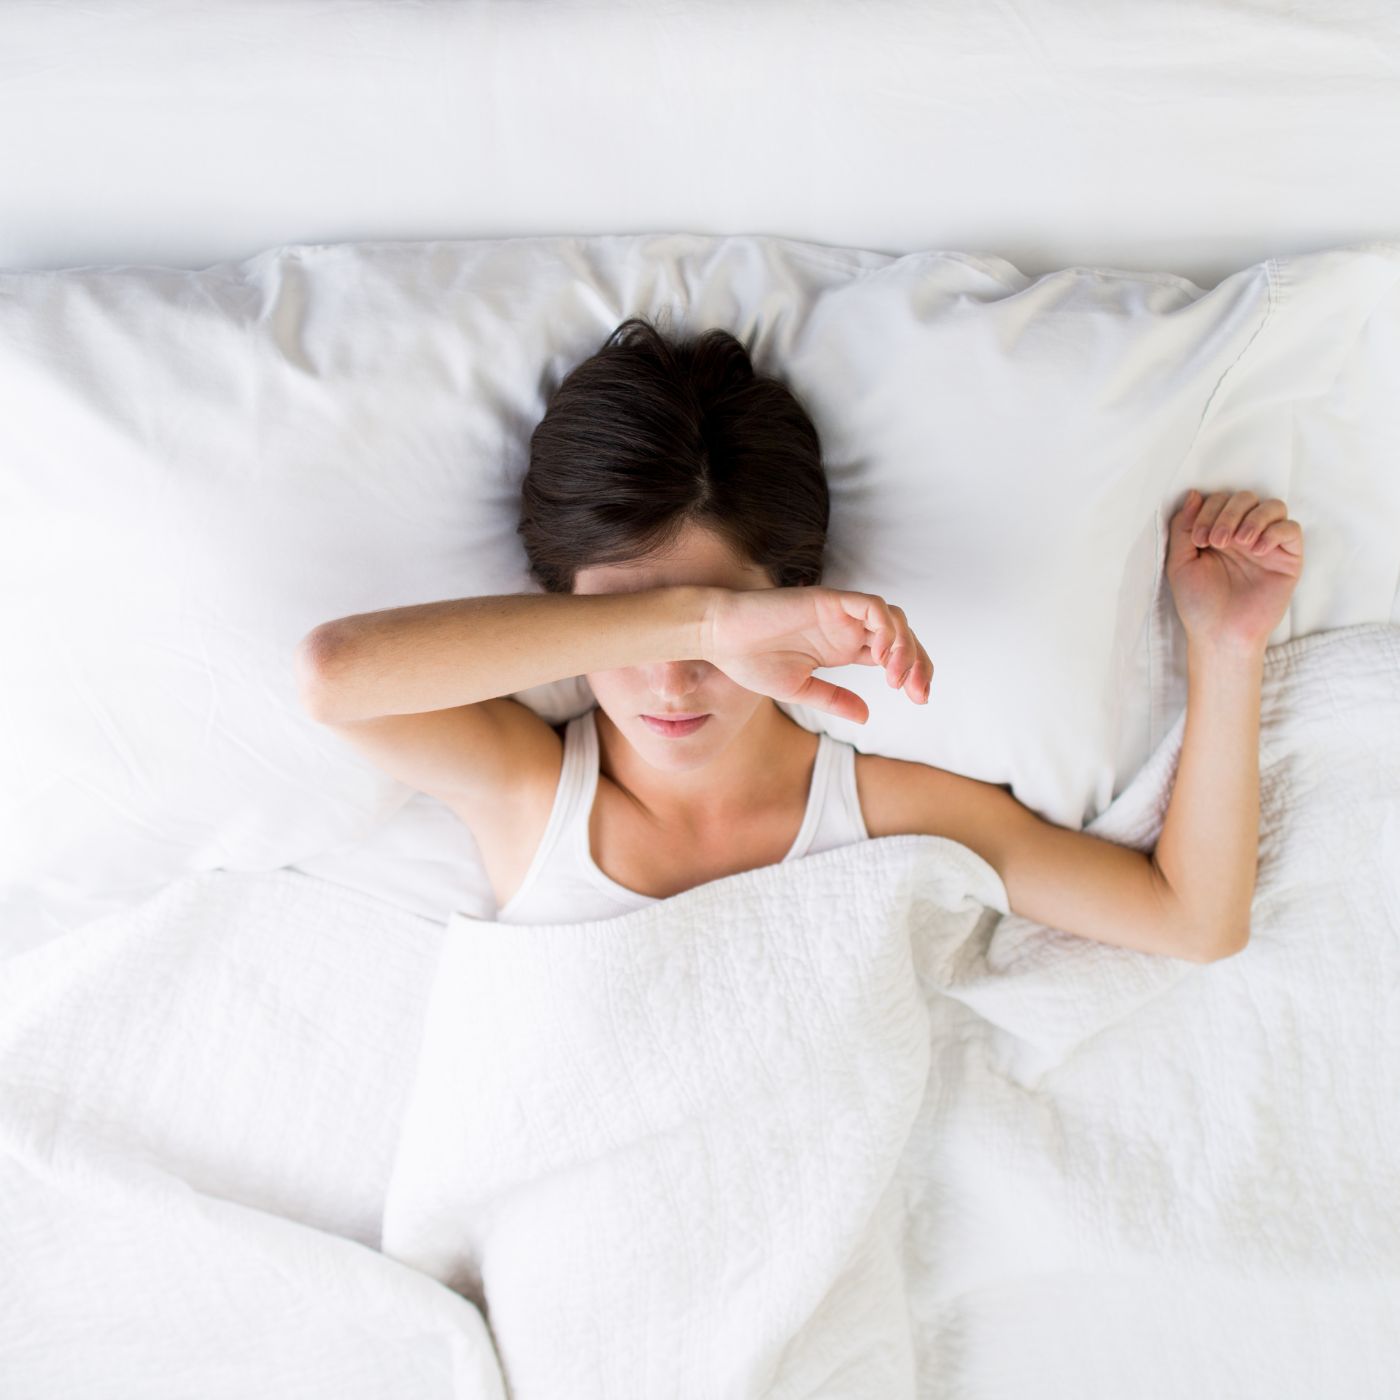 Sleep your way to glowing skin: 10 tips and hacks for better sleep during the holidays